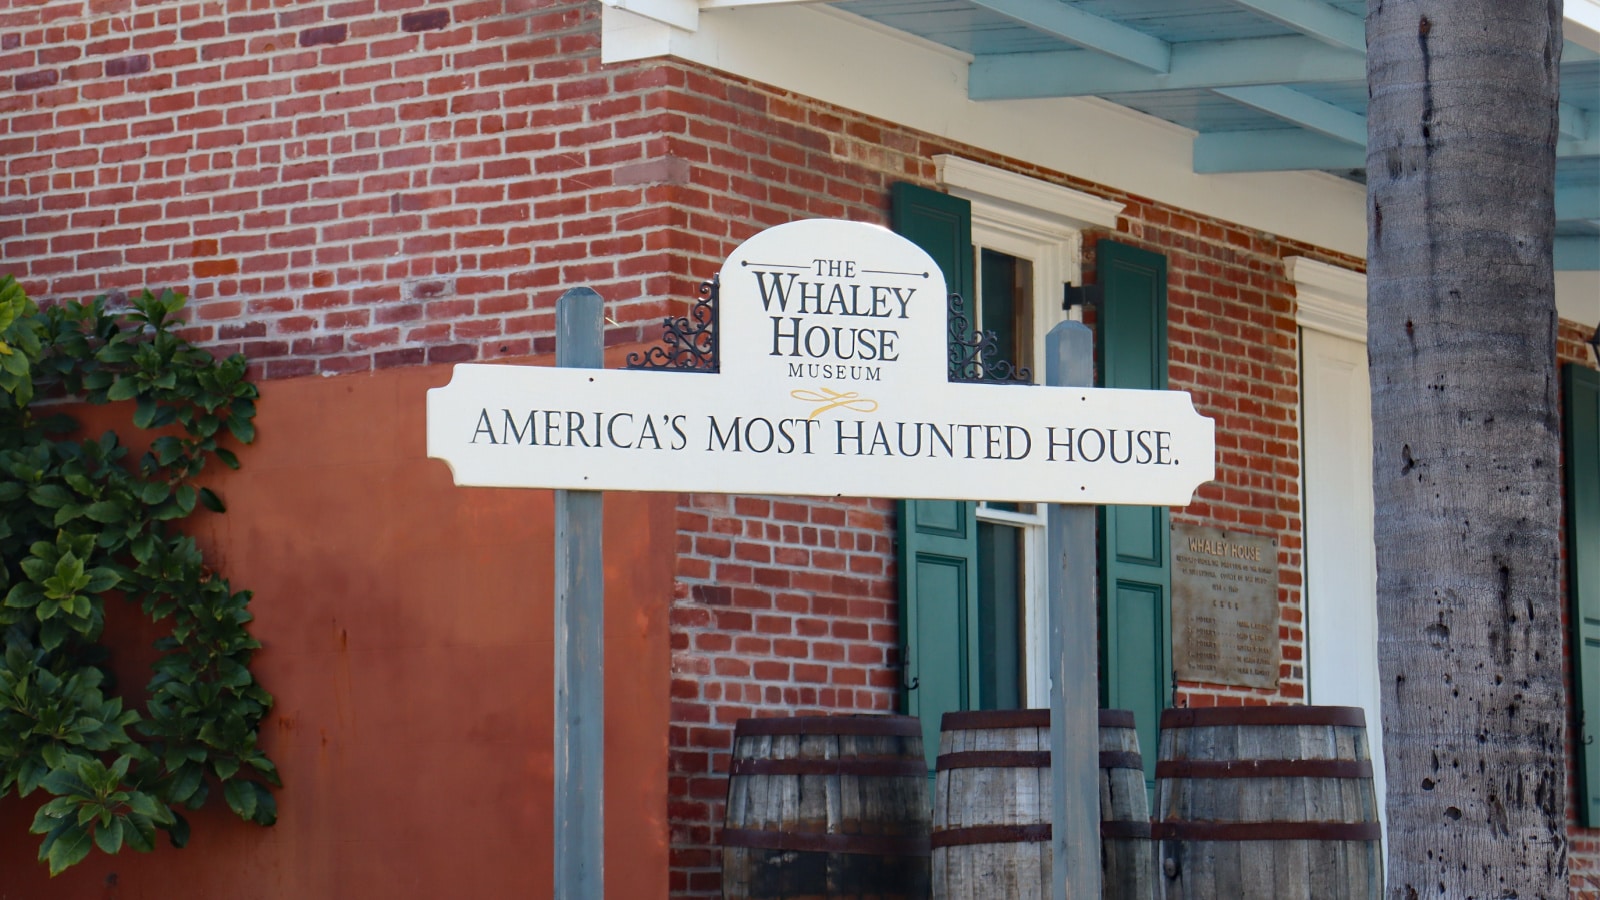 San Diego, CA USA - April 7, 2023: The famous Whaley House Museum, America's most haunted house sign at Old Town San Diego.